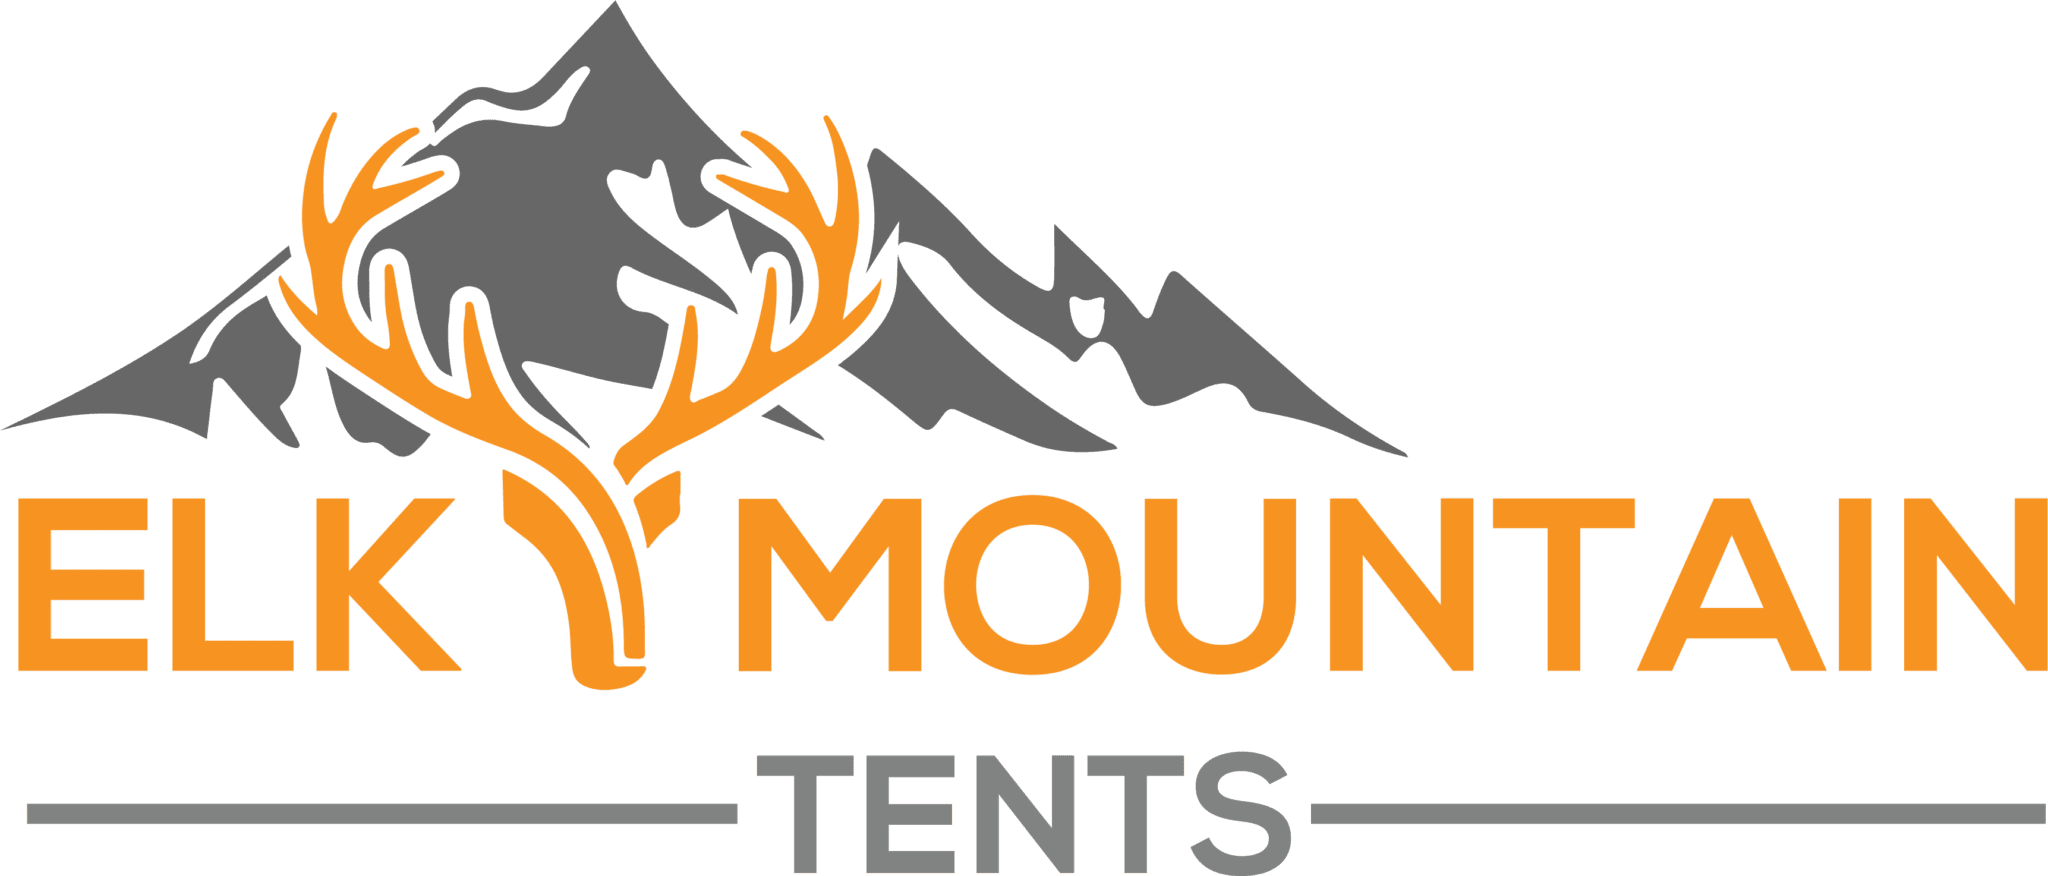 Canvas Tents by Elk Mountain Tents